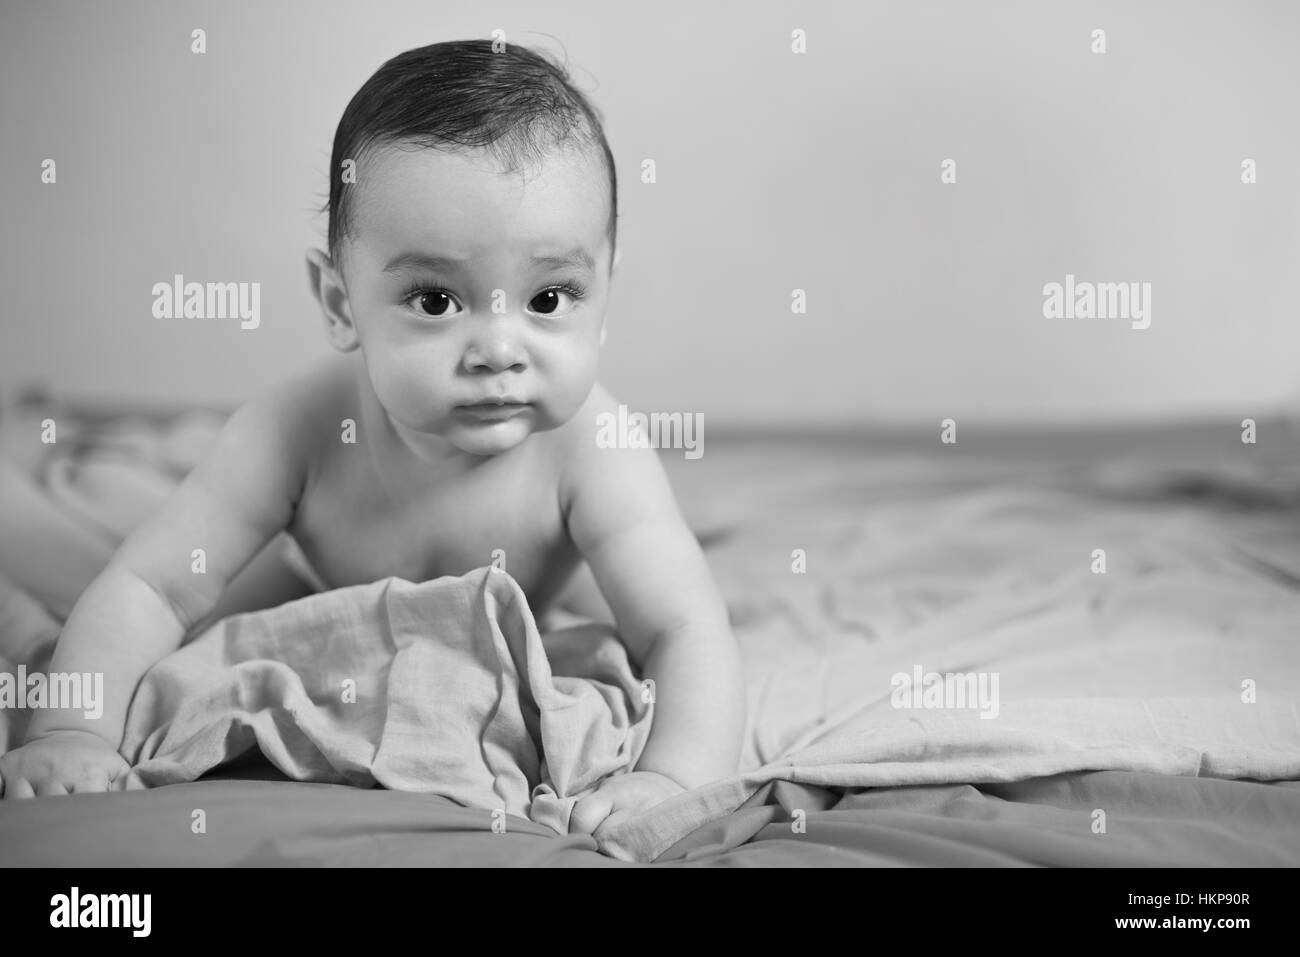 black and white photo of small baby on bed Stock Photo